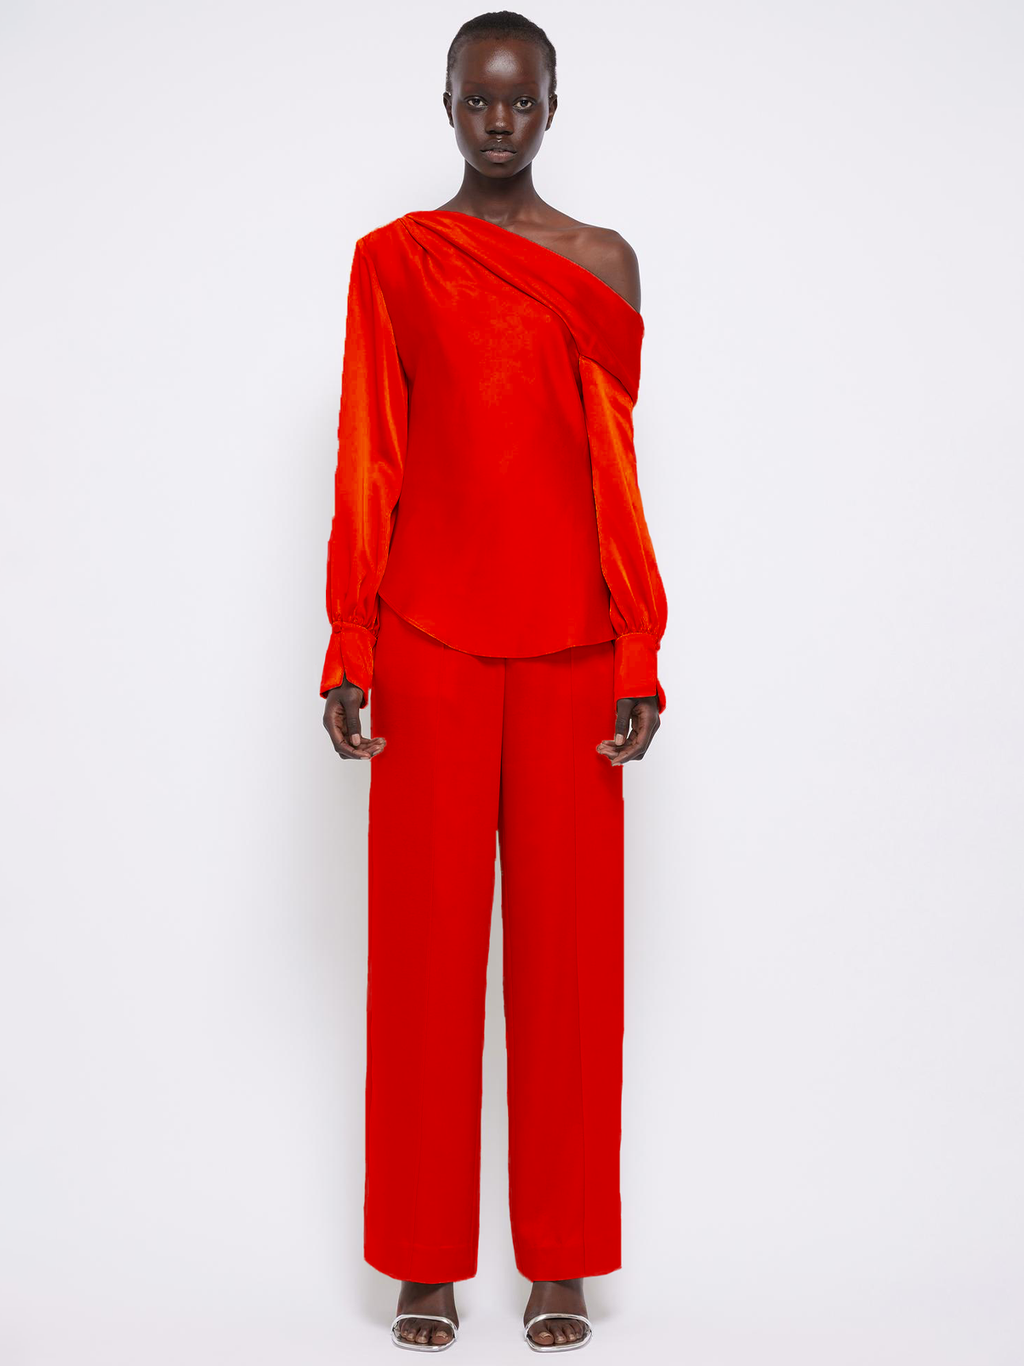 Kyra Wide Leg Pant in Flame